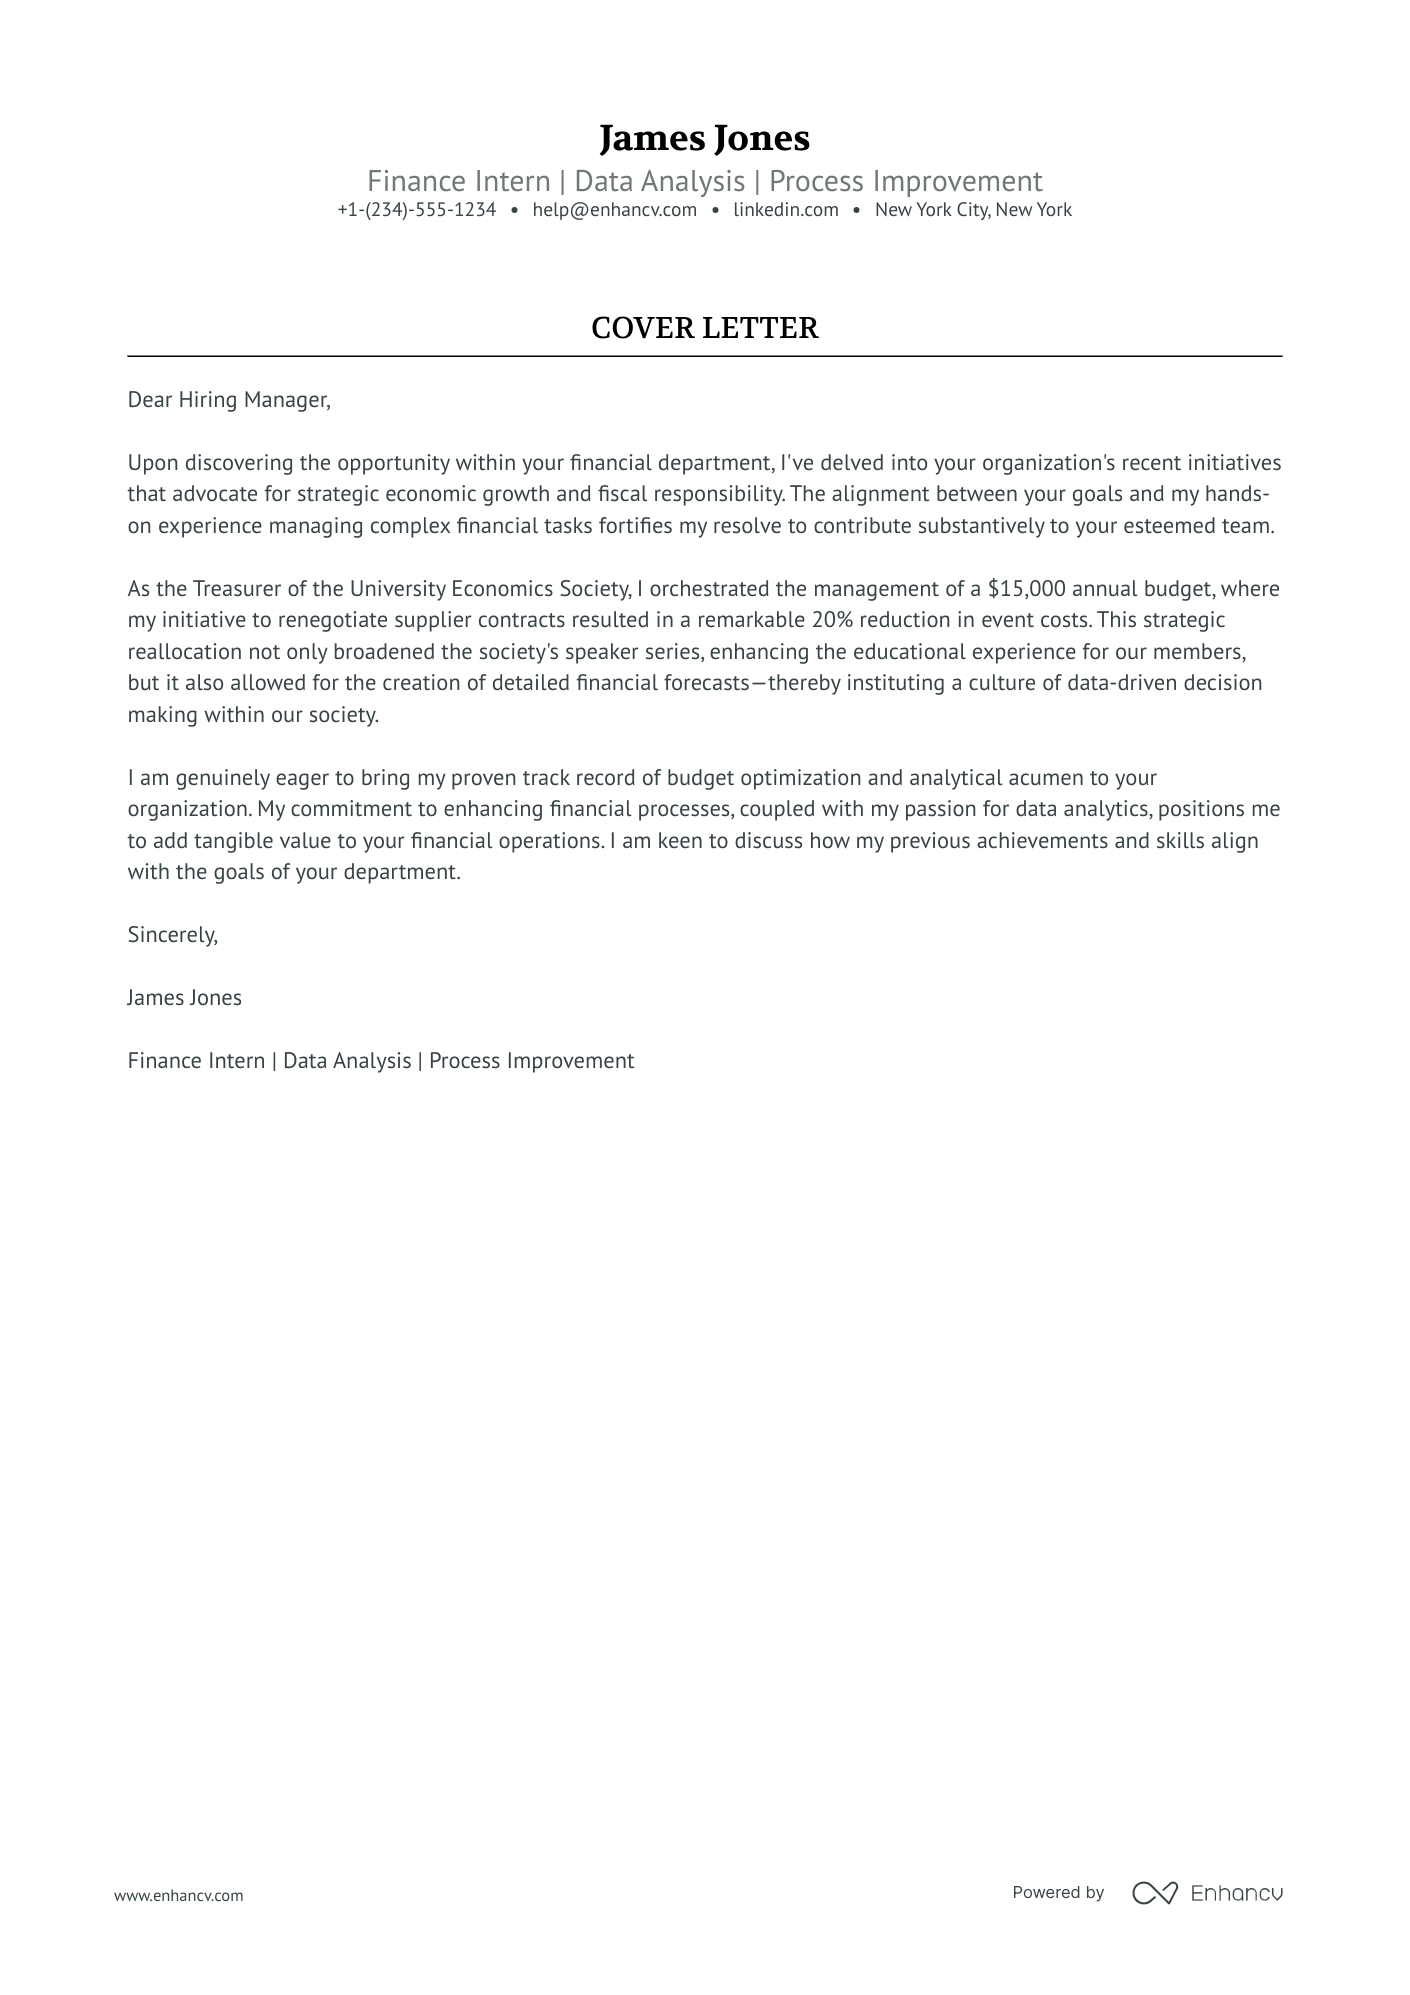 cover letter for finance position with experience